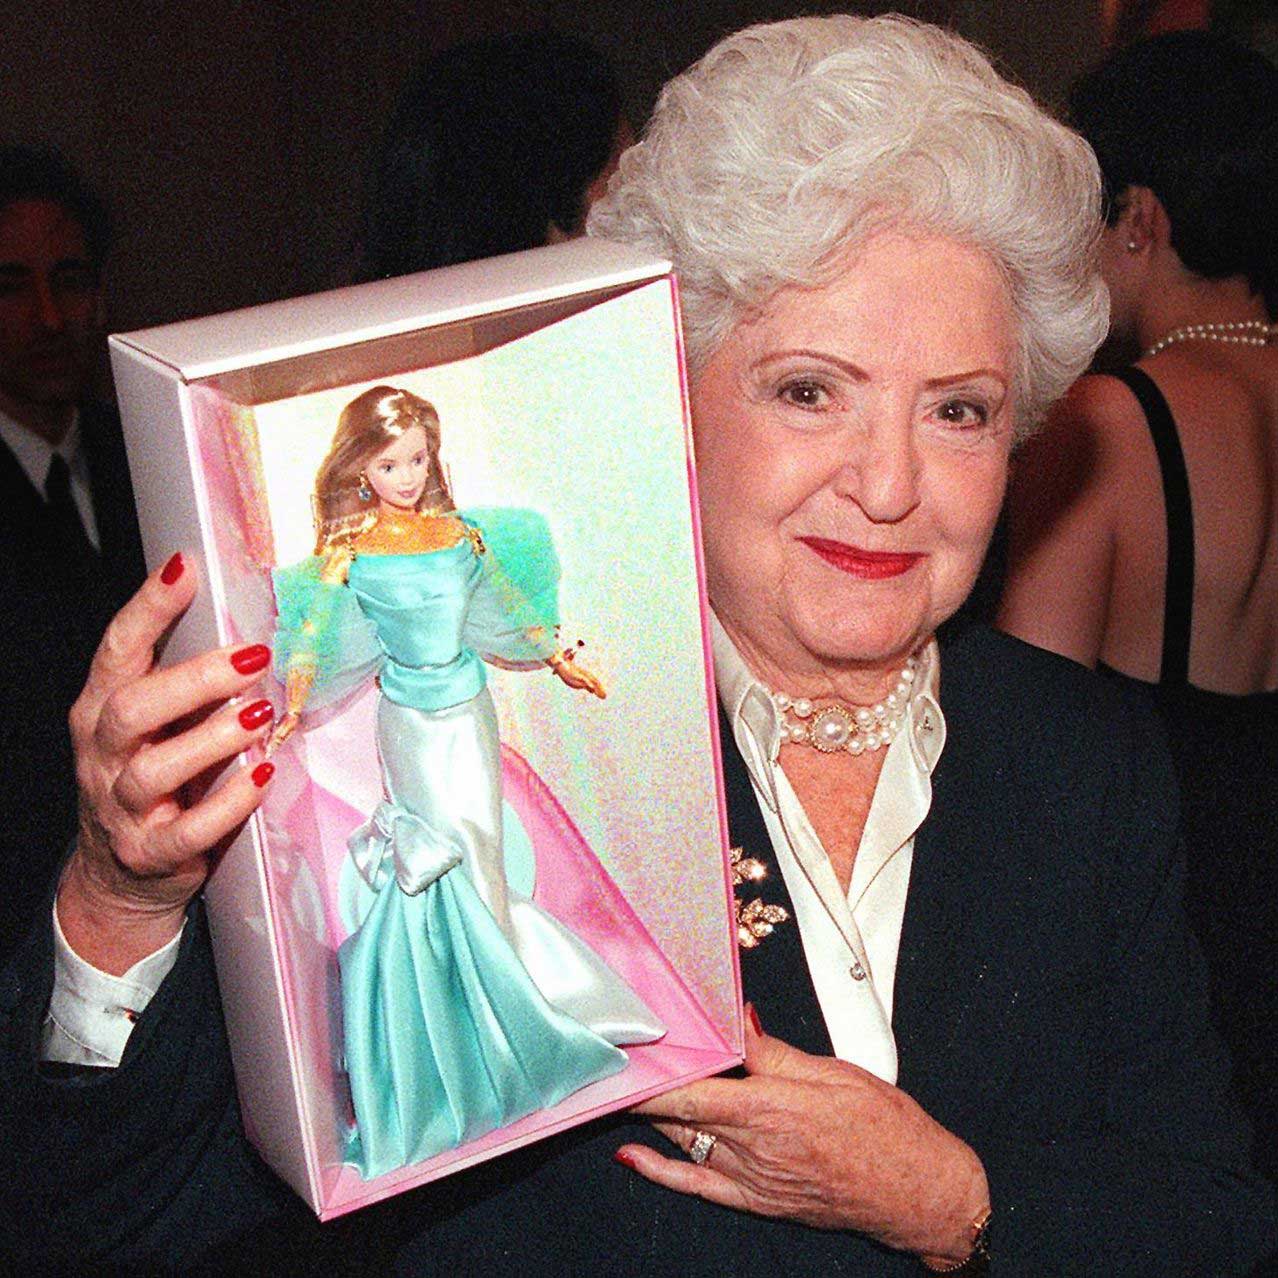 Ruth Handler, inventor of the Barbie doll